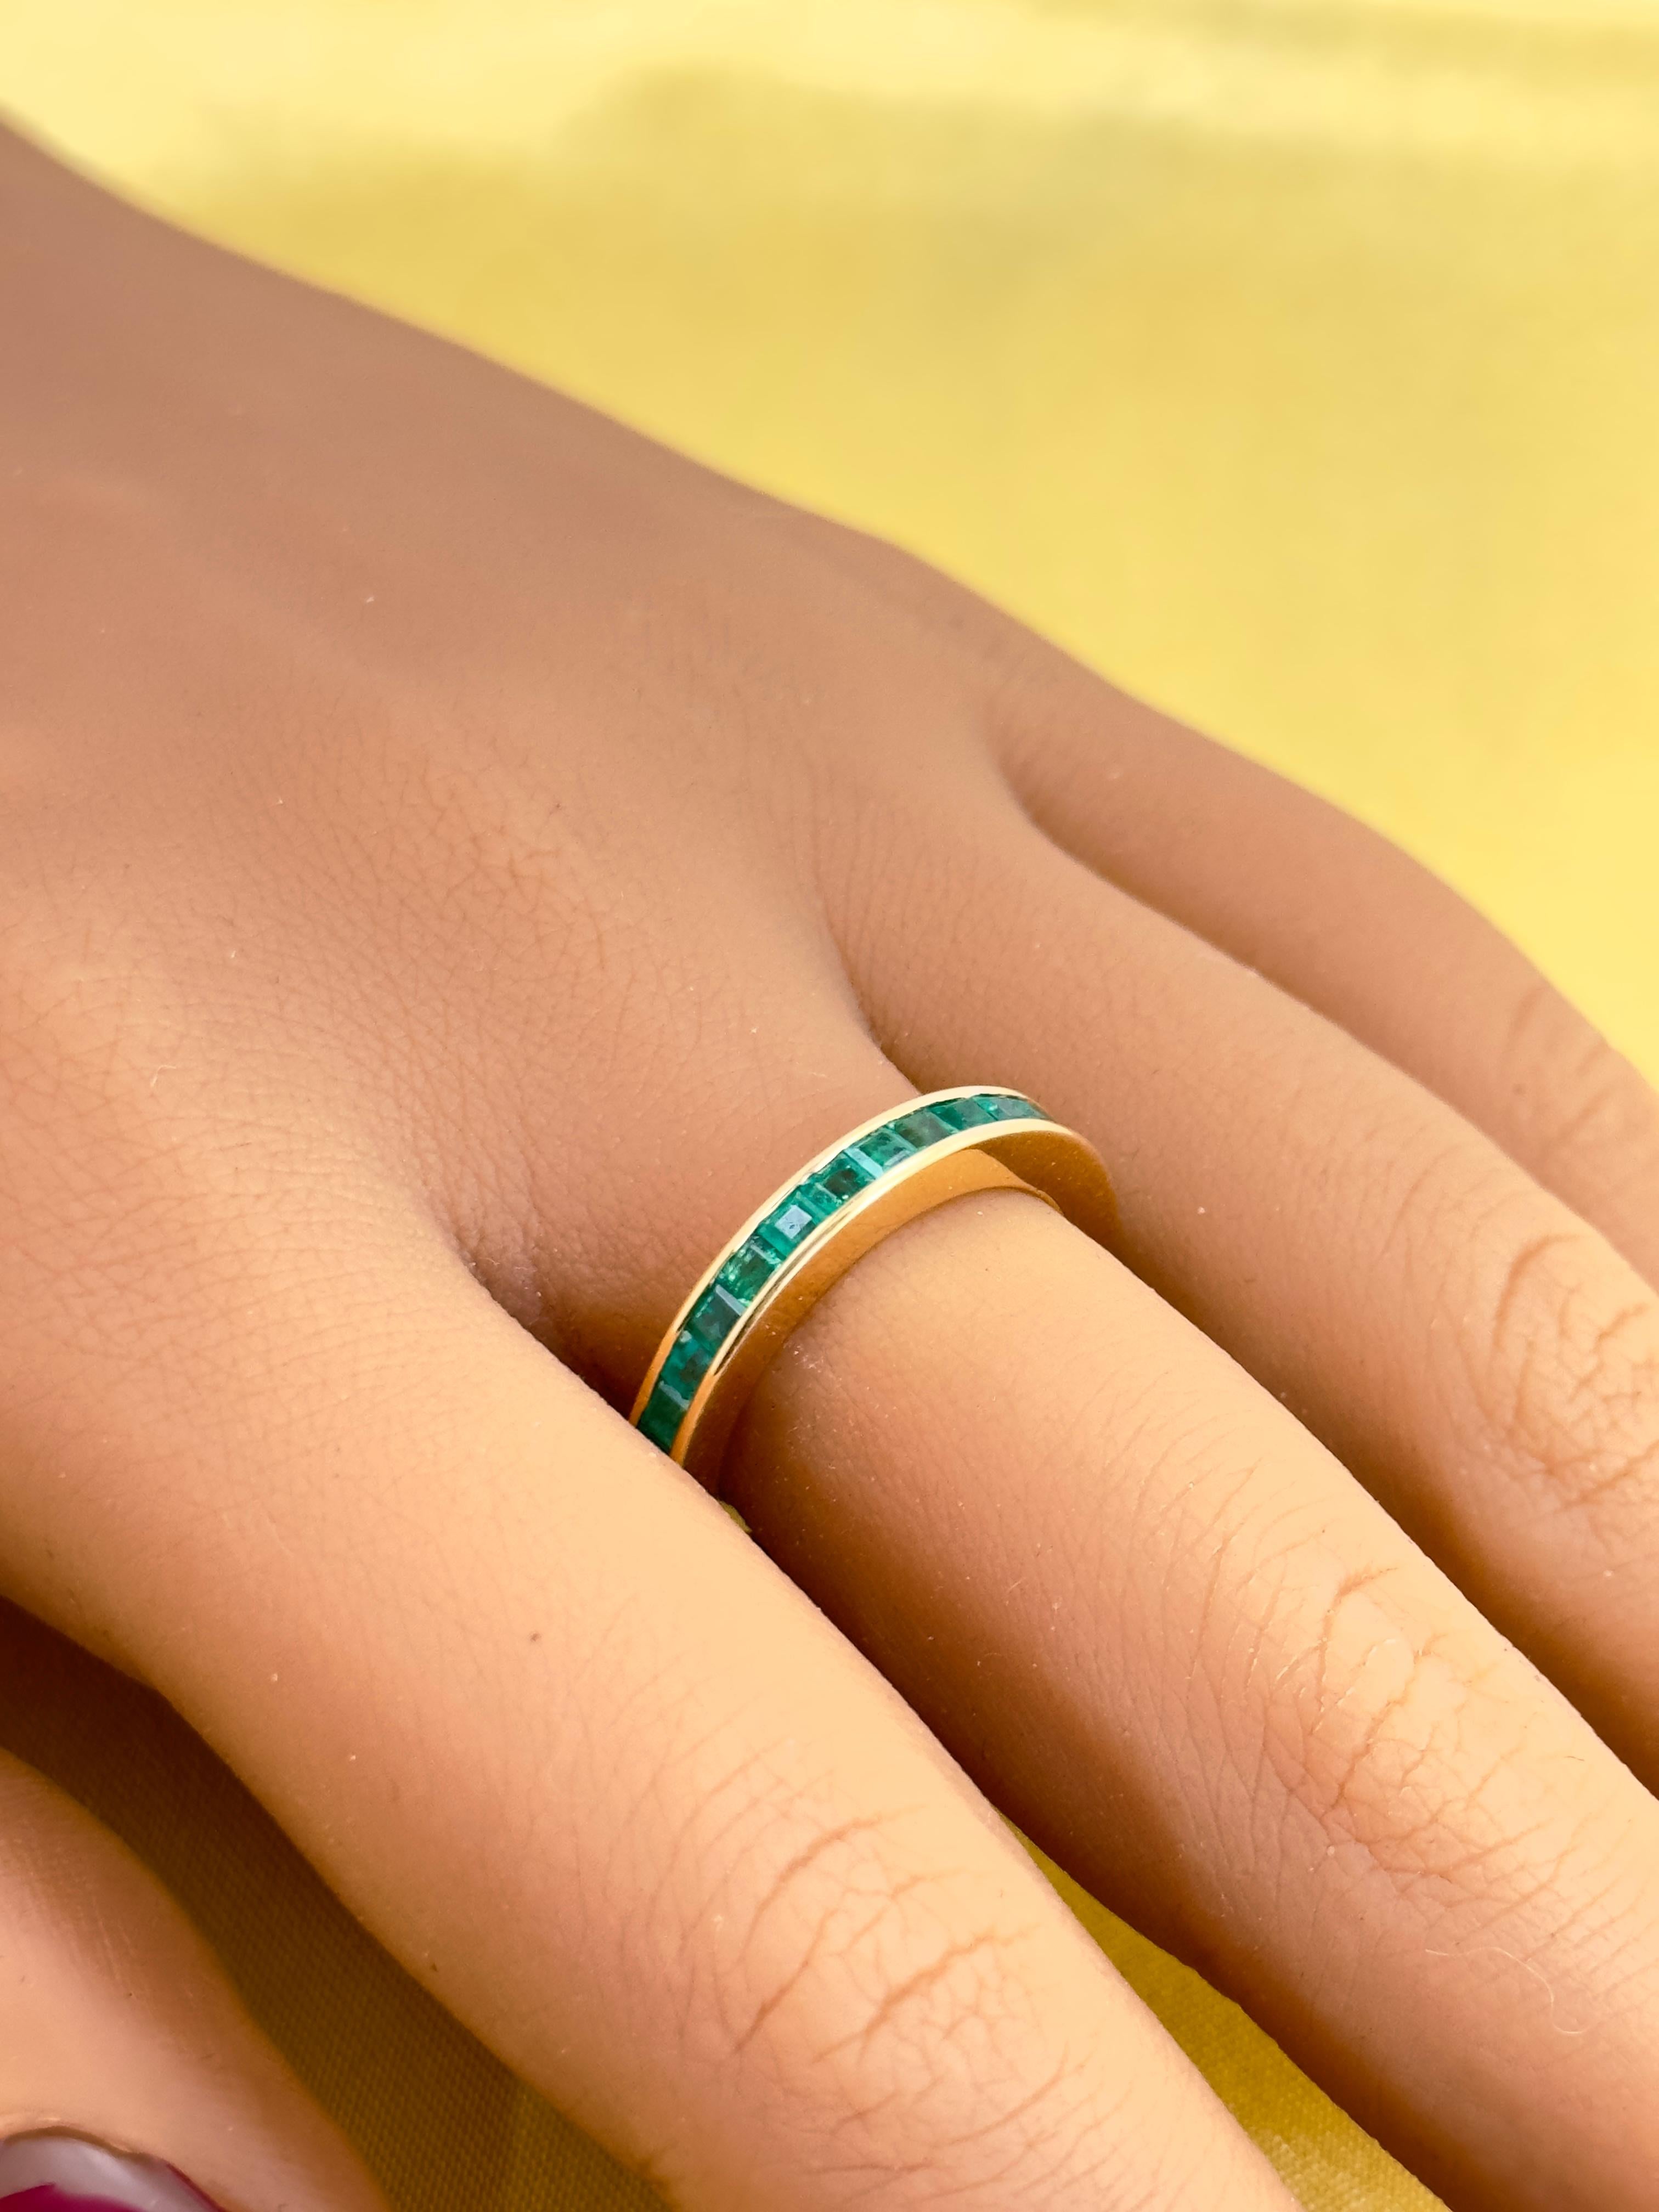 Princess cut Emeralds set in 18k yellow gold! A beautiful channel setting holds these natural emeralds securely in place in solid 18k yellow gold. The band is very smooth on the inside so it is comfortable to wear and the emeralds have great luster